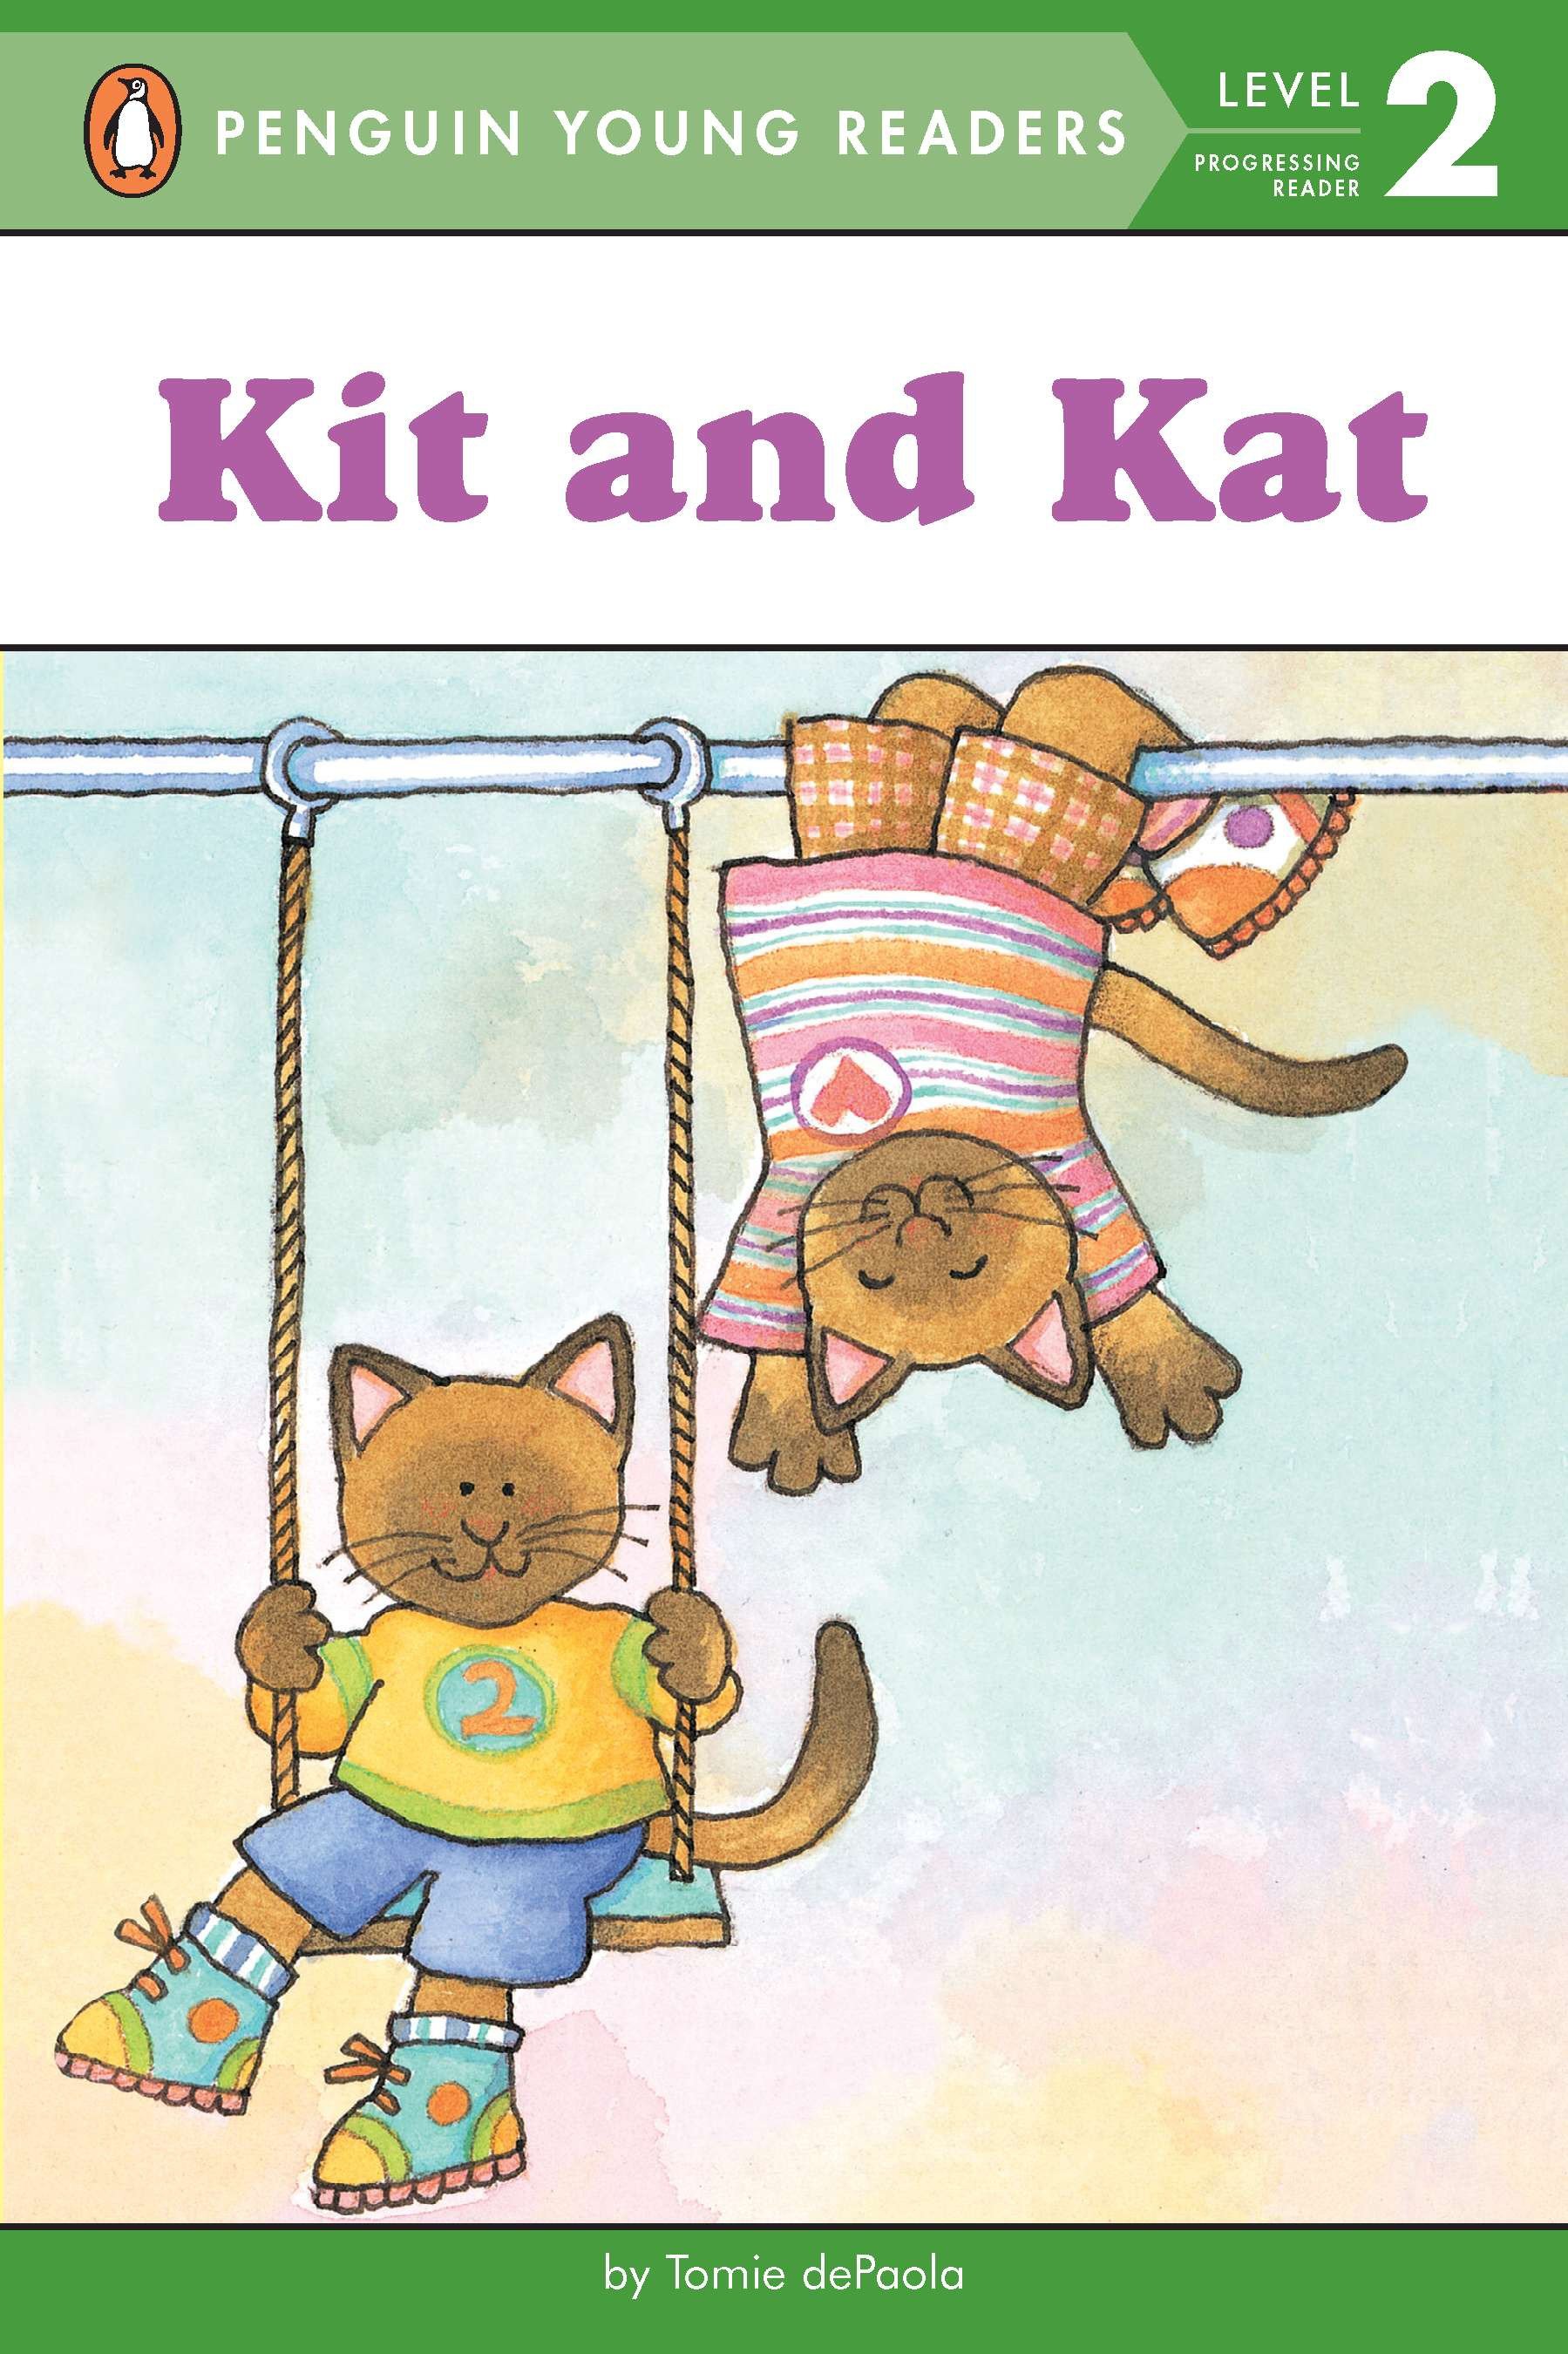 Penguin Young Readers, Level 2 - Kit and Kat | dePaola, Tomie